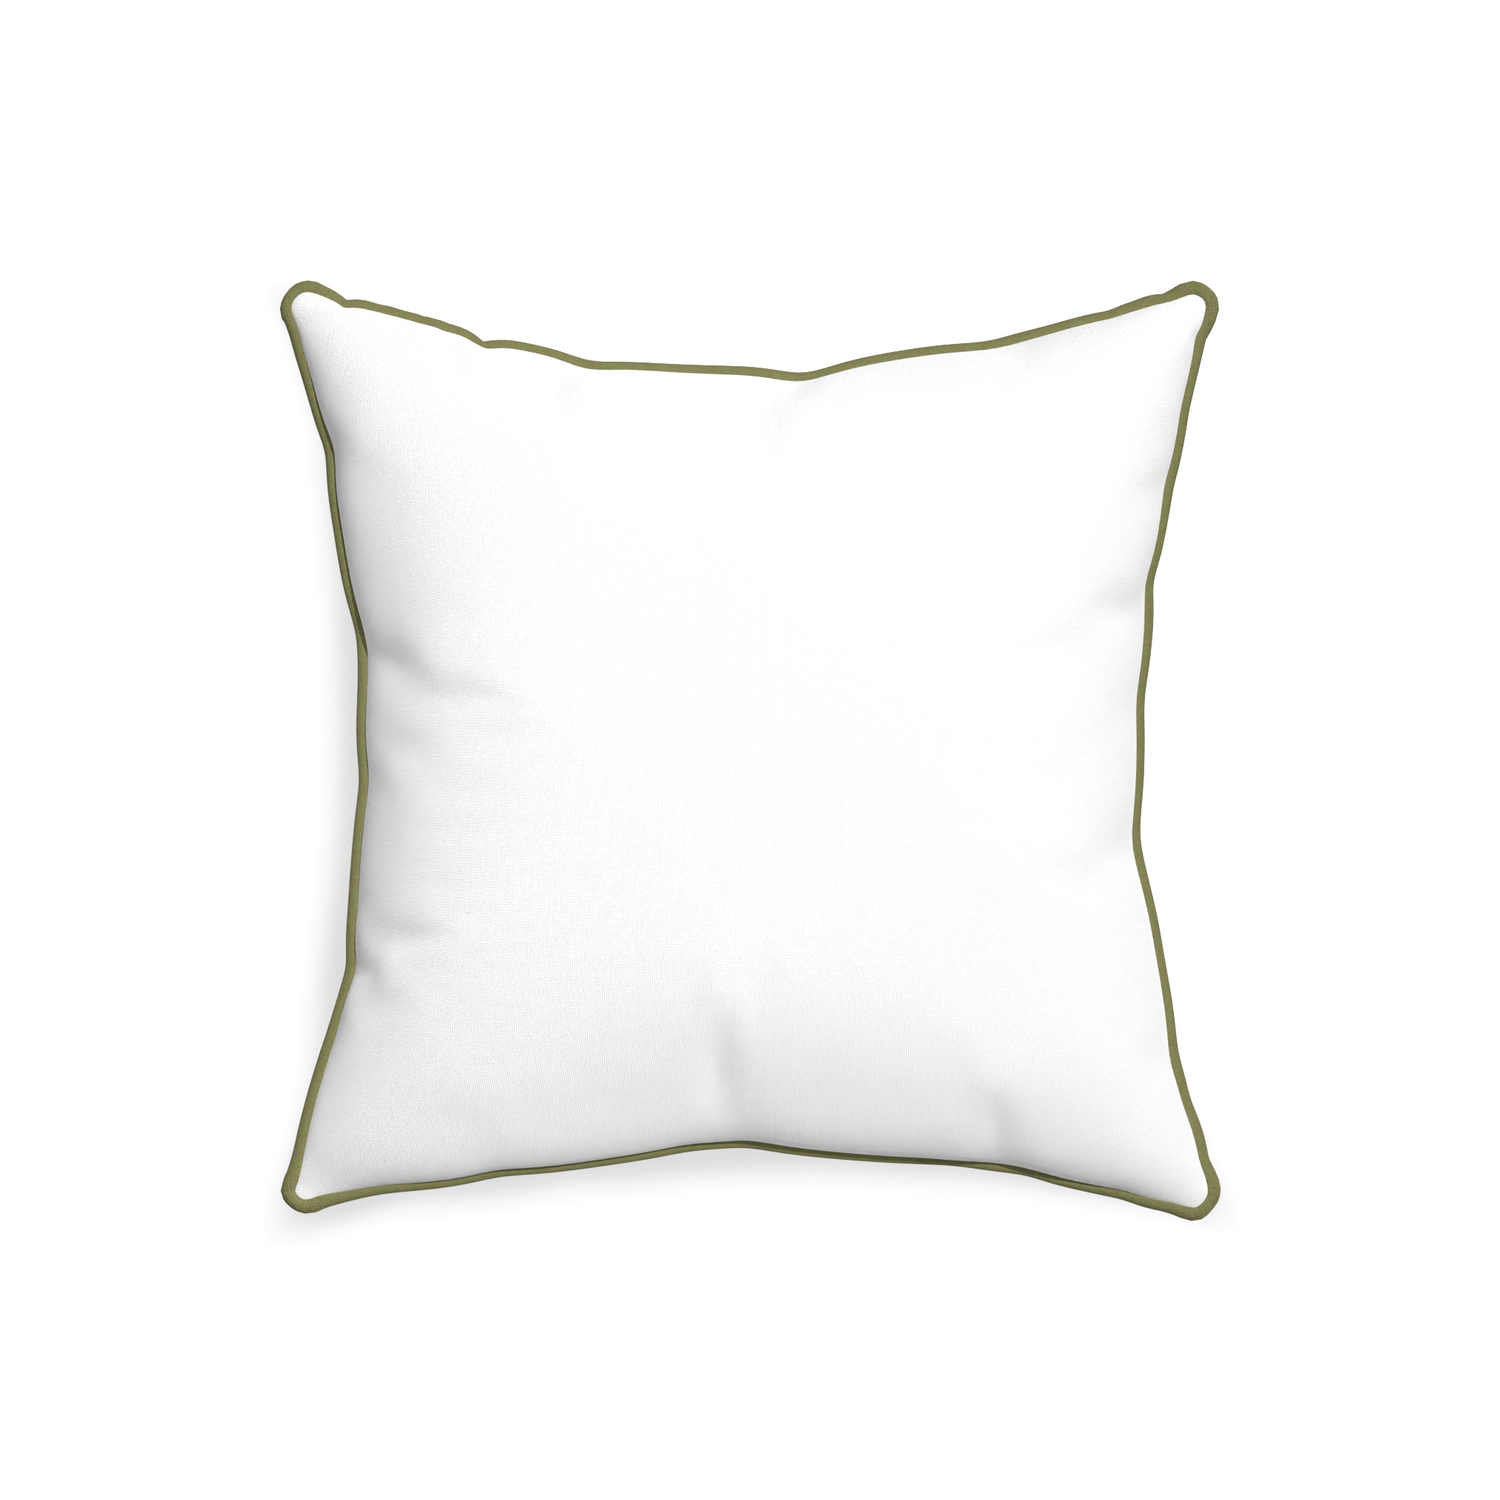 20-square snow custom pillow with moss piping on white background